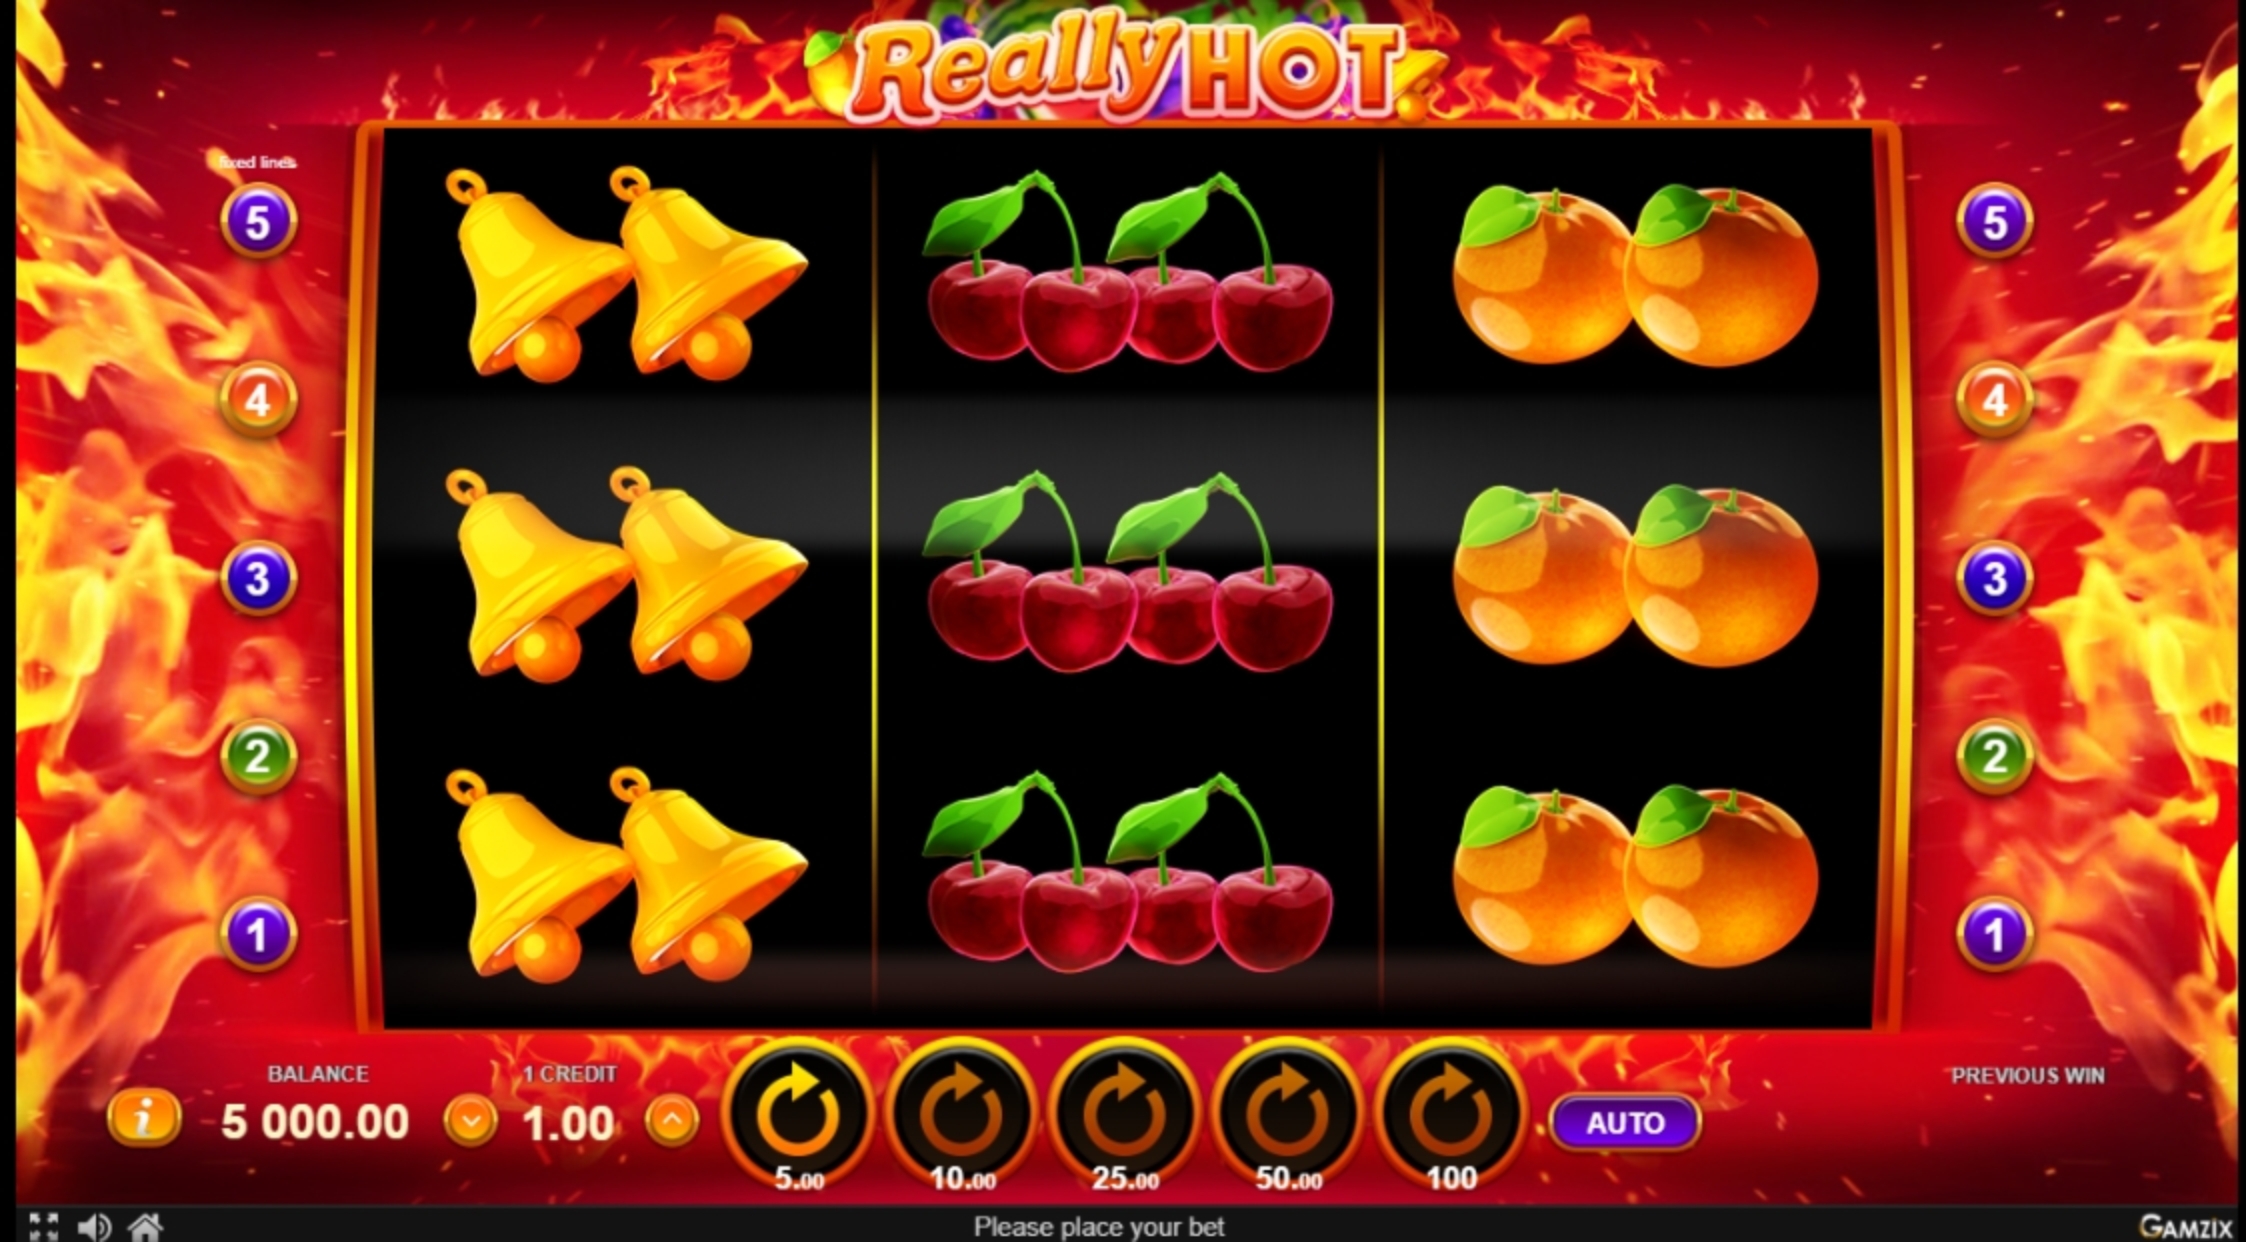 Reels in Really Hot Slot Game by Gamzix